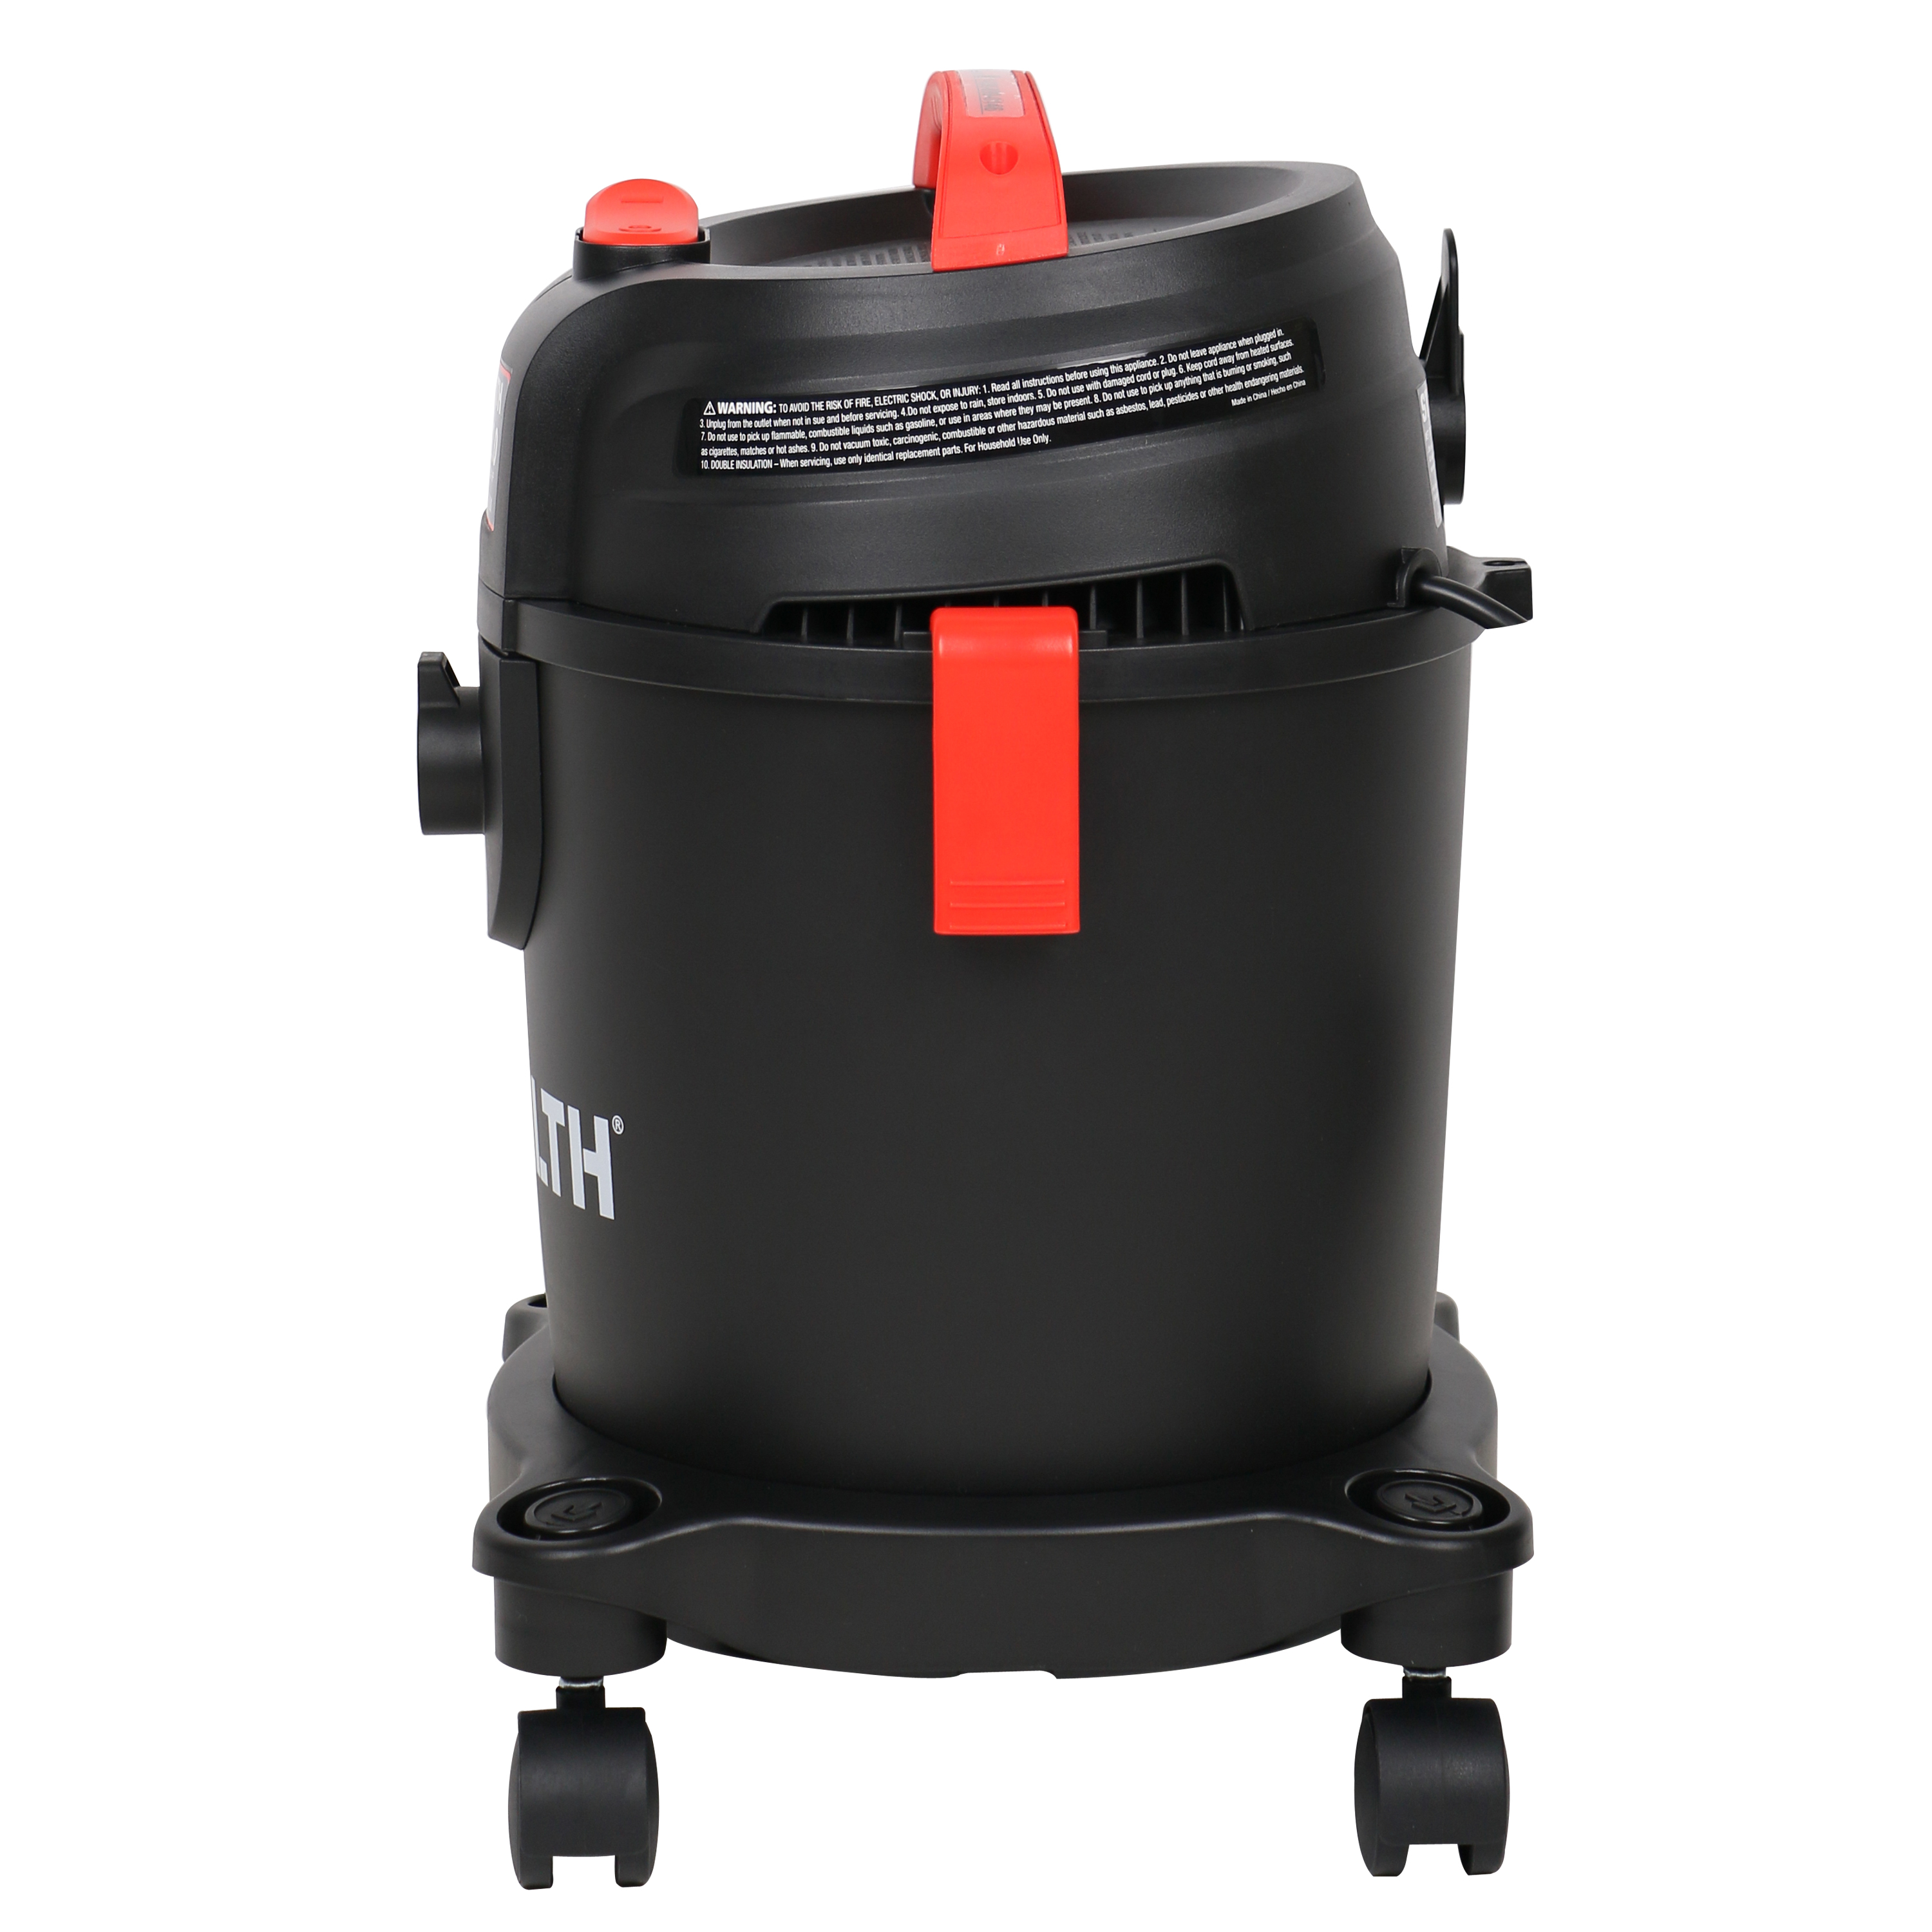 STEALTH 3 Gallon 3 Peak Horsepower Wet Dry Vacuum (AT18202P-3B) with Swiveling Casters - image 3 of 5